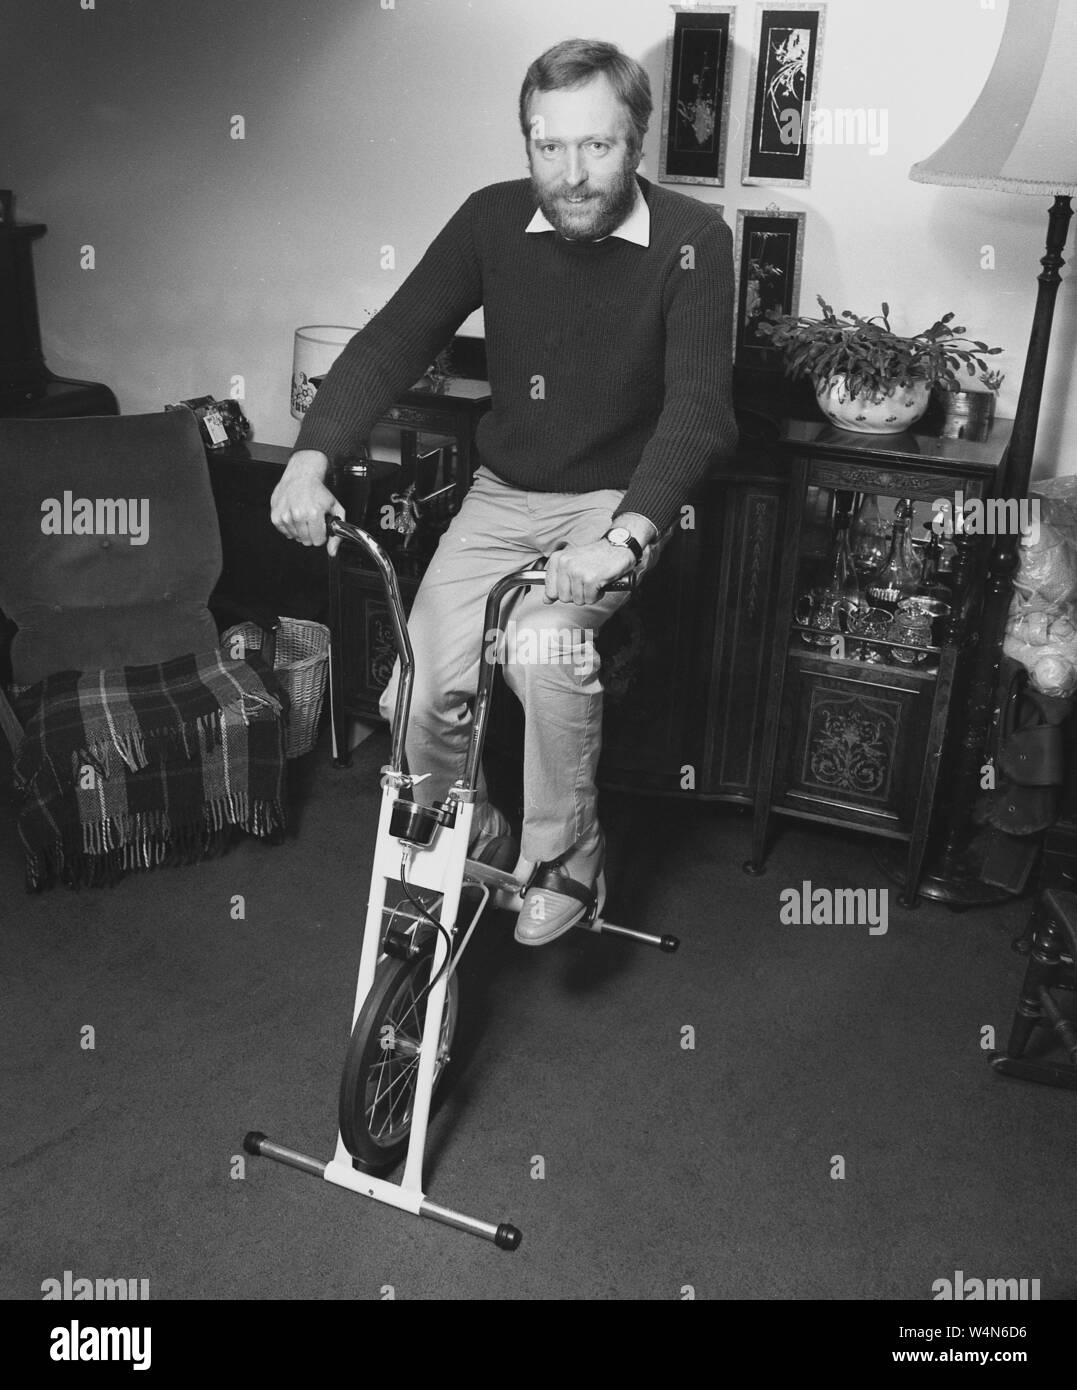 1980s, historical, a man getting some exercise in his front room on a stationary home pedal cycle or mini exercise bike, England, UK. Stock Photo